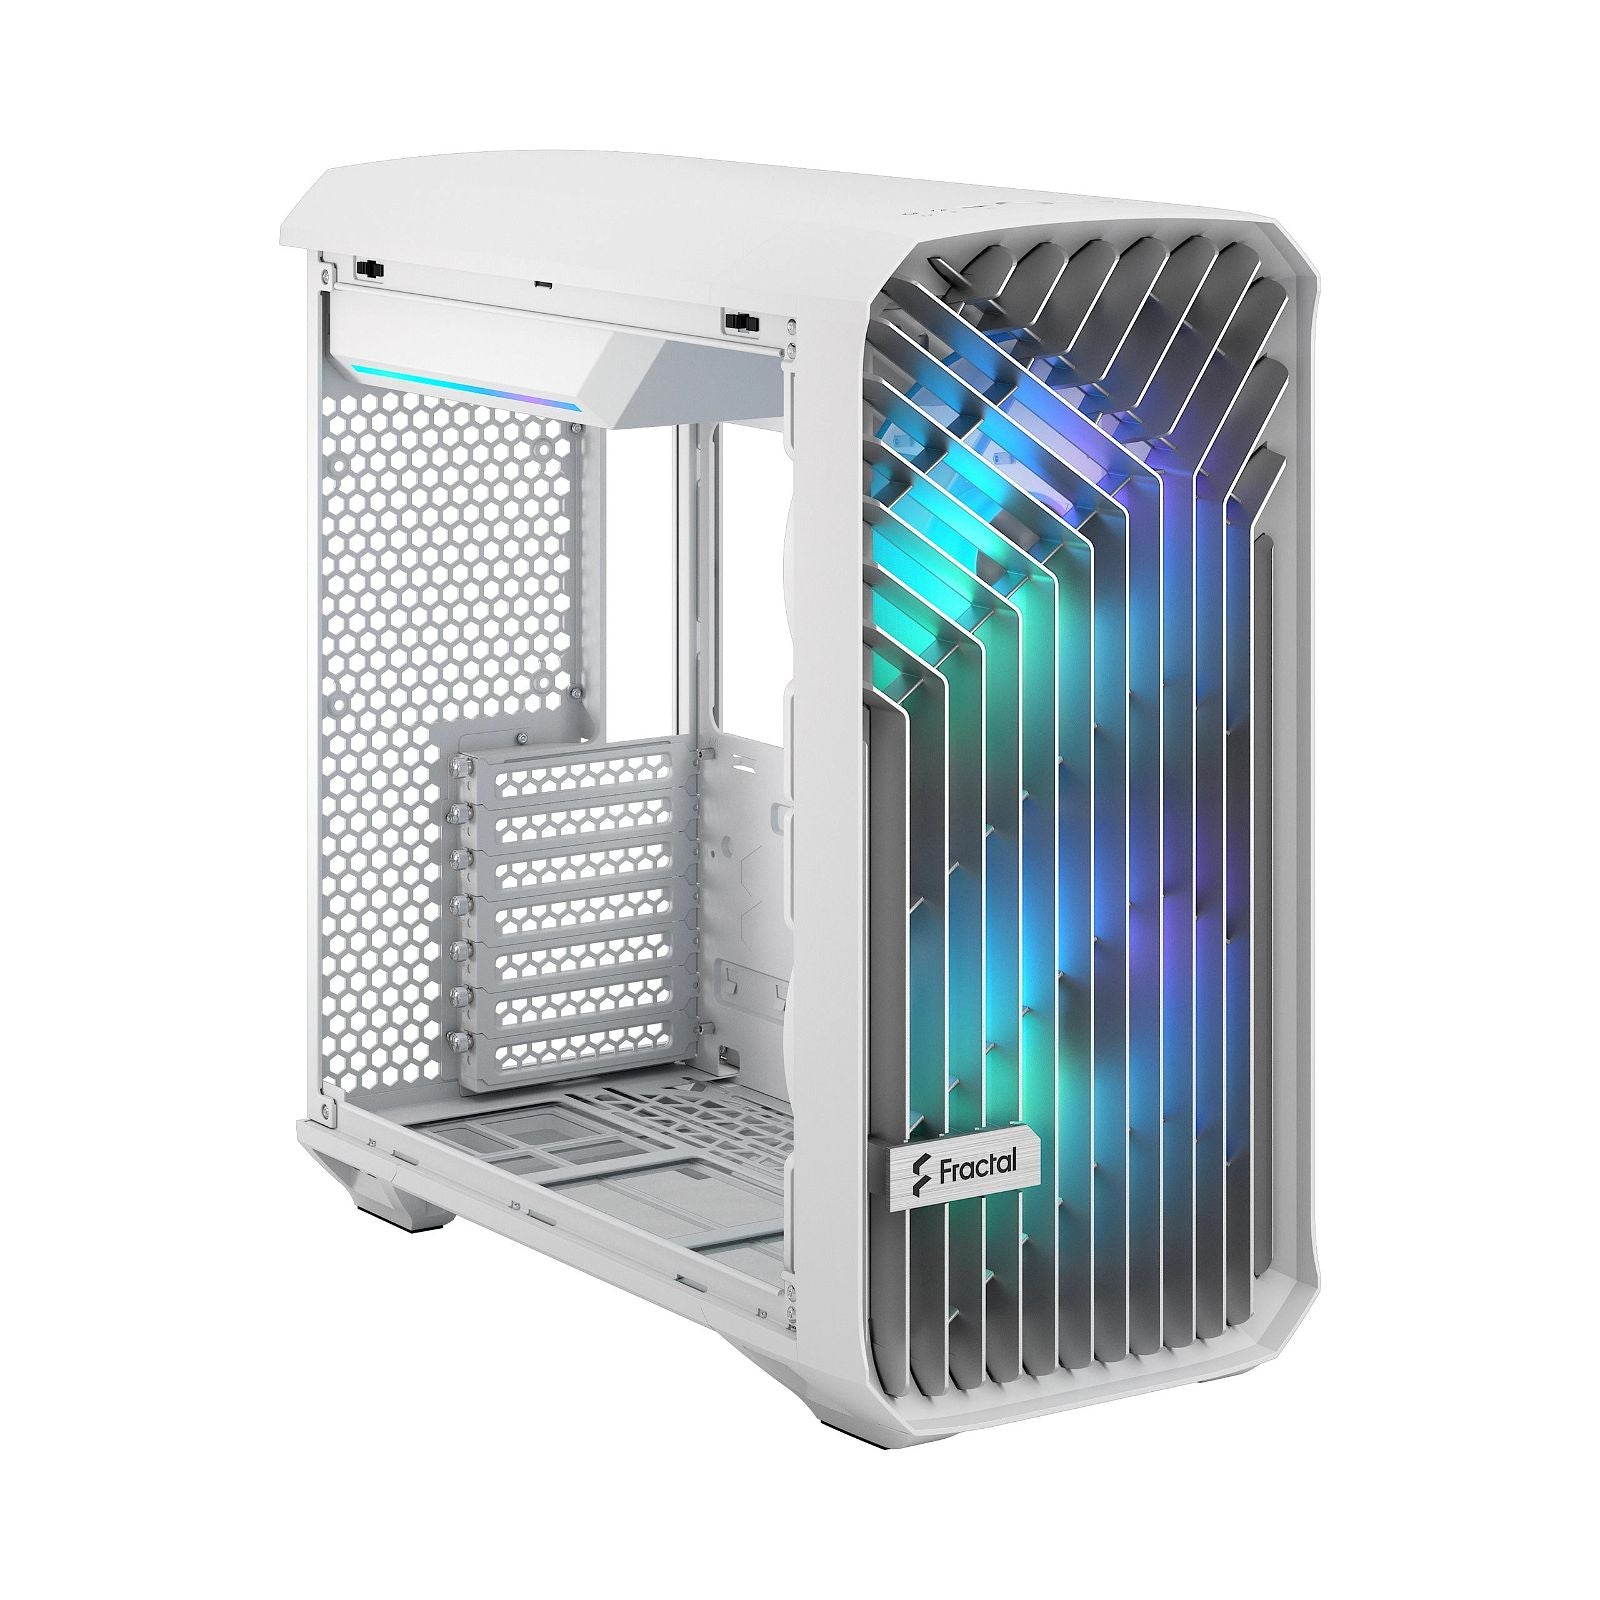 FRACTAL CASE MID TOWER TORRENT COMPACT RGB WHITE TG LIGHT TINT - OVERCLOCK Computer